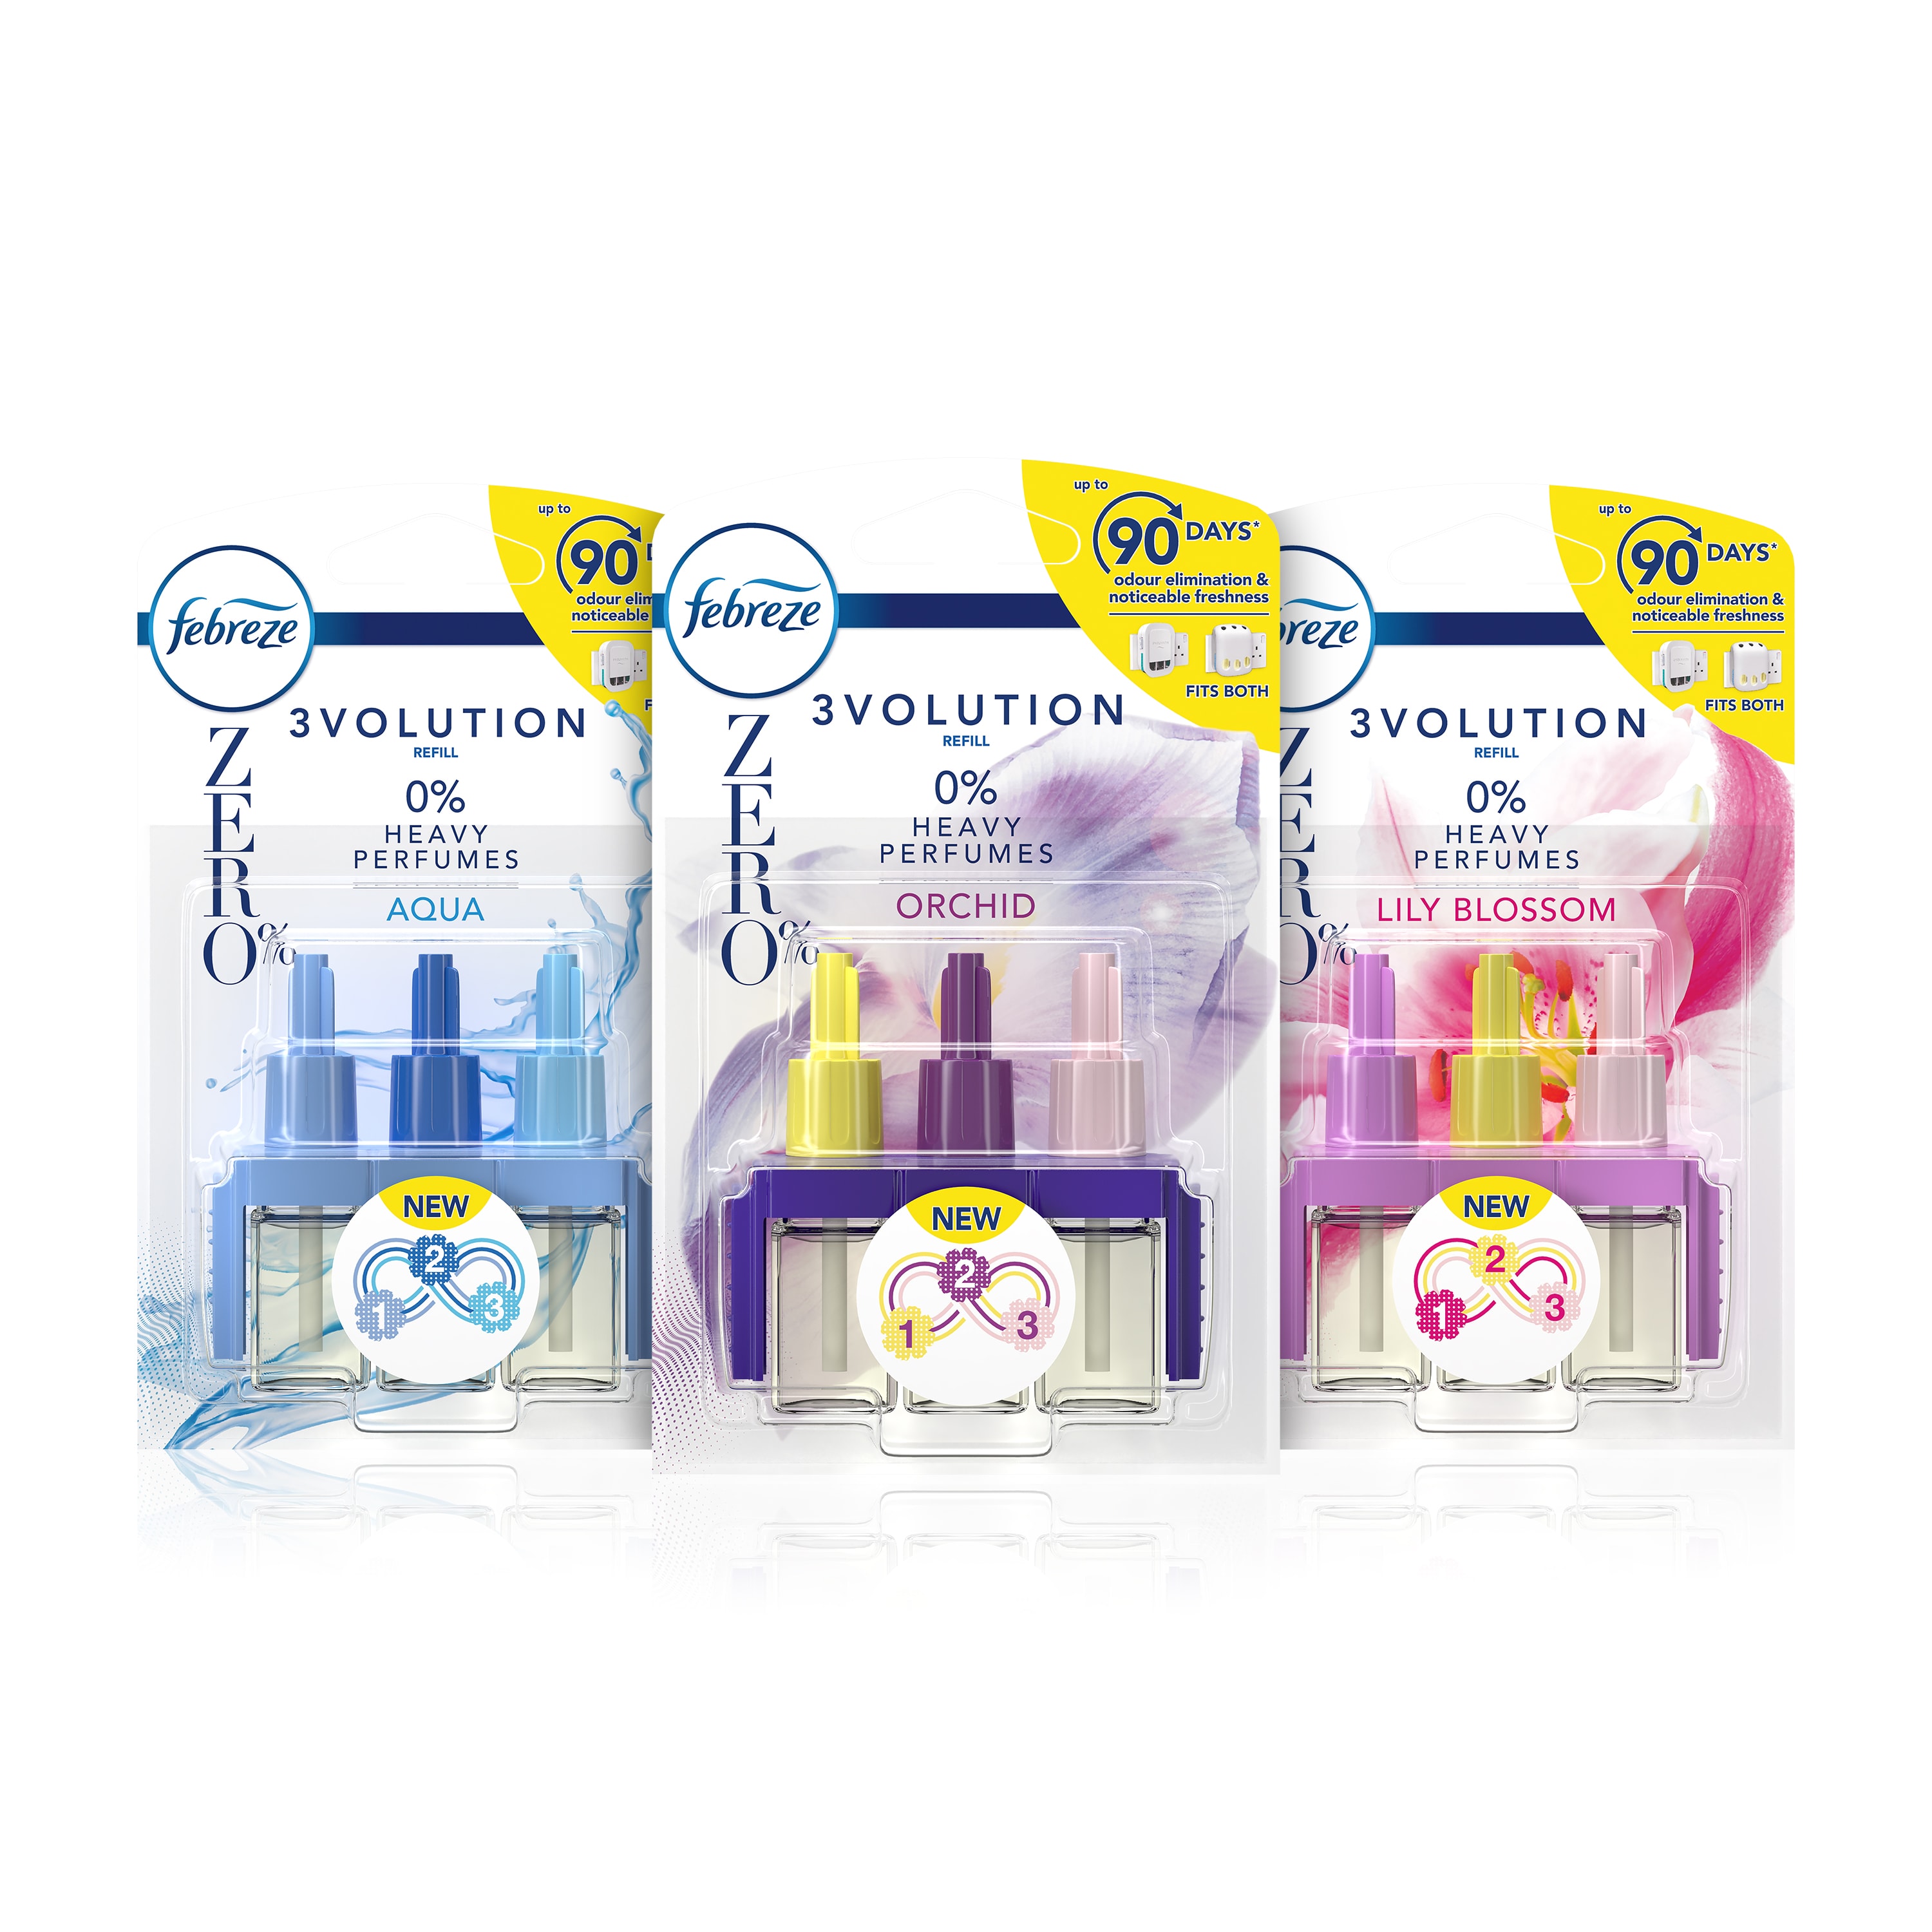 Febreze Ambi Pur 3Volution Air Freshener Plug-in Refills Only